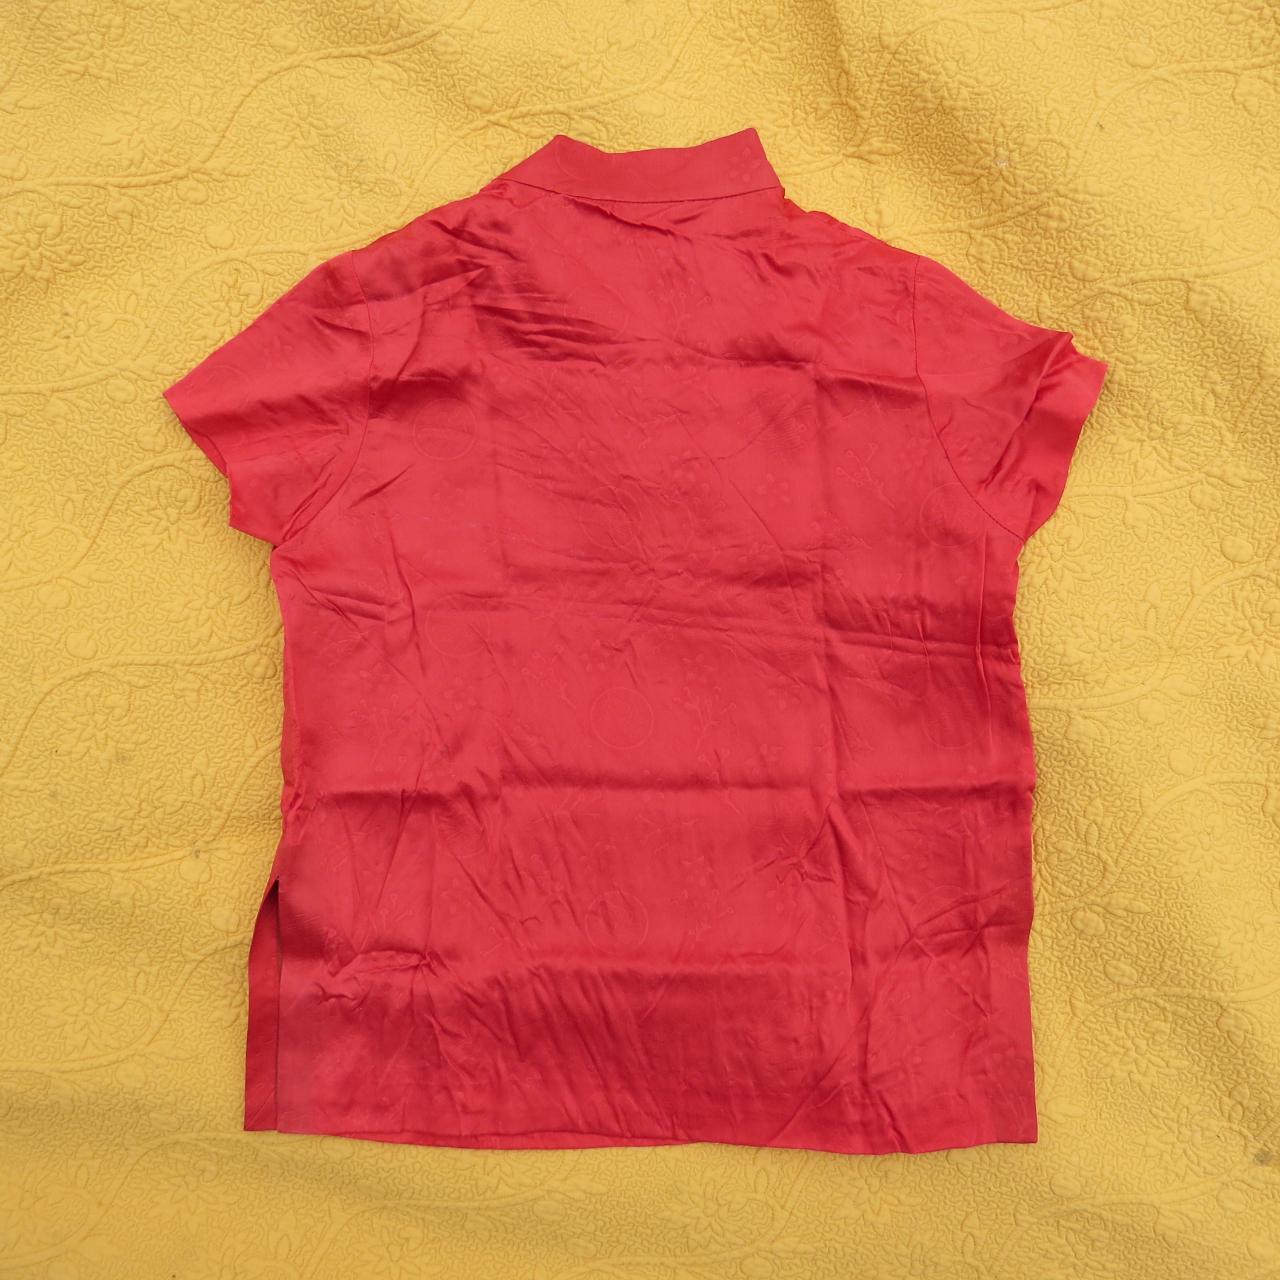 Product Image 2 - Five Colors Earth Beijing shirt

100%